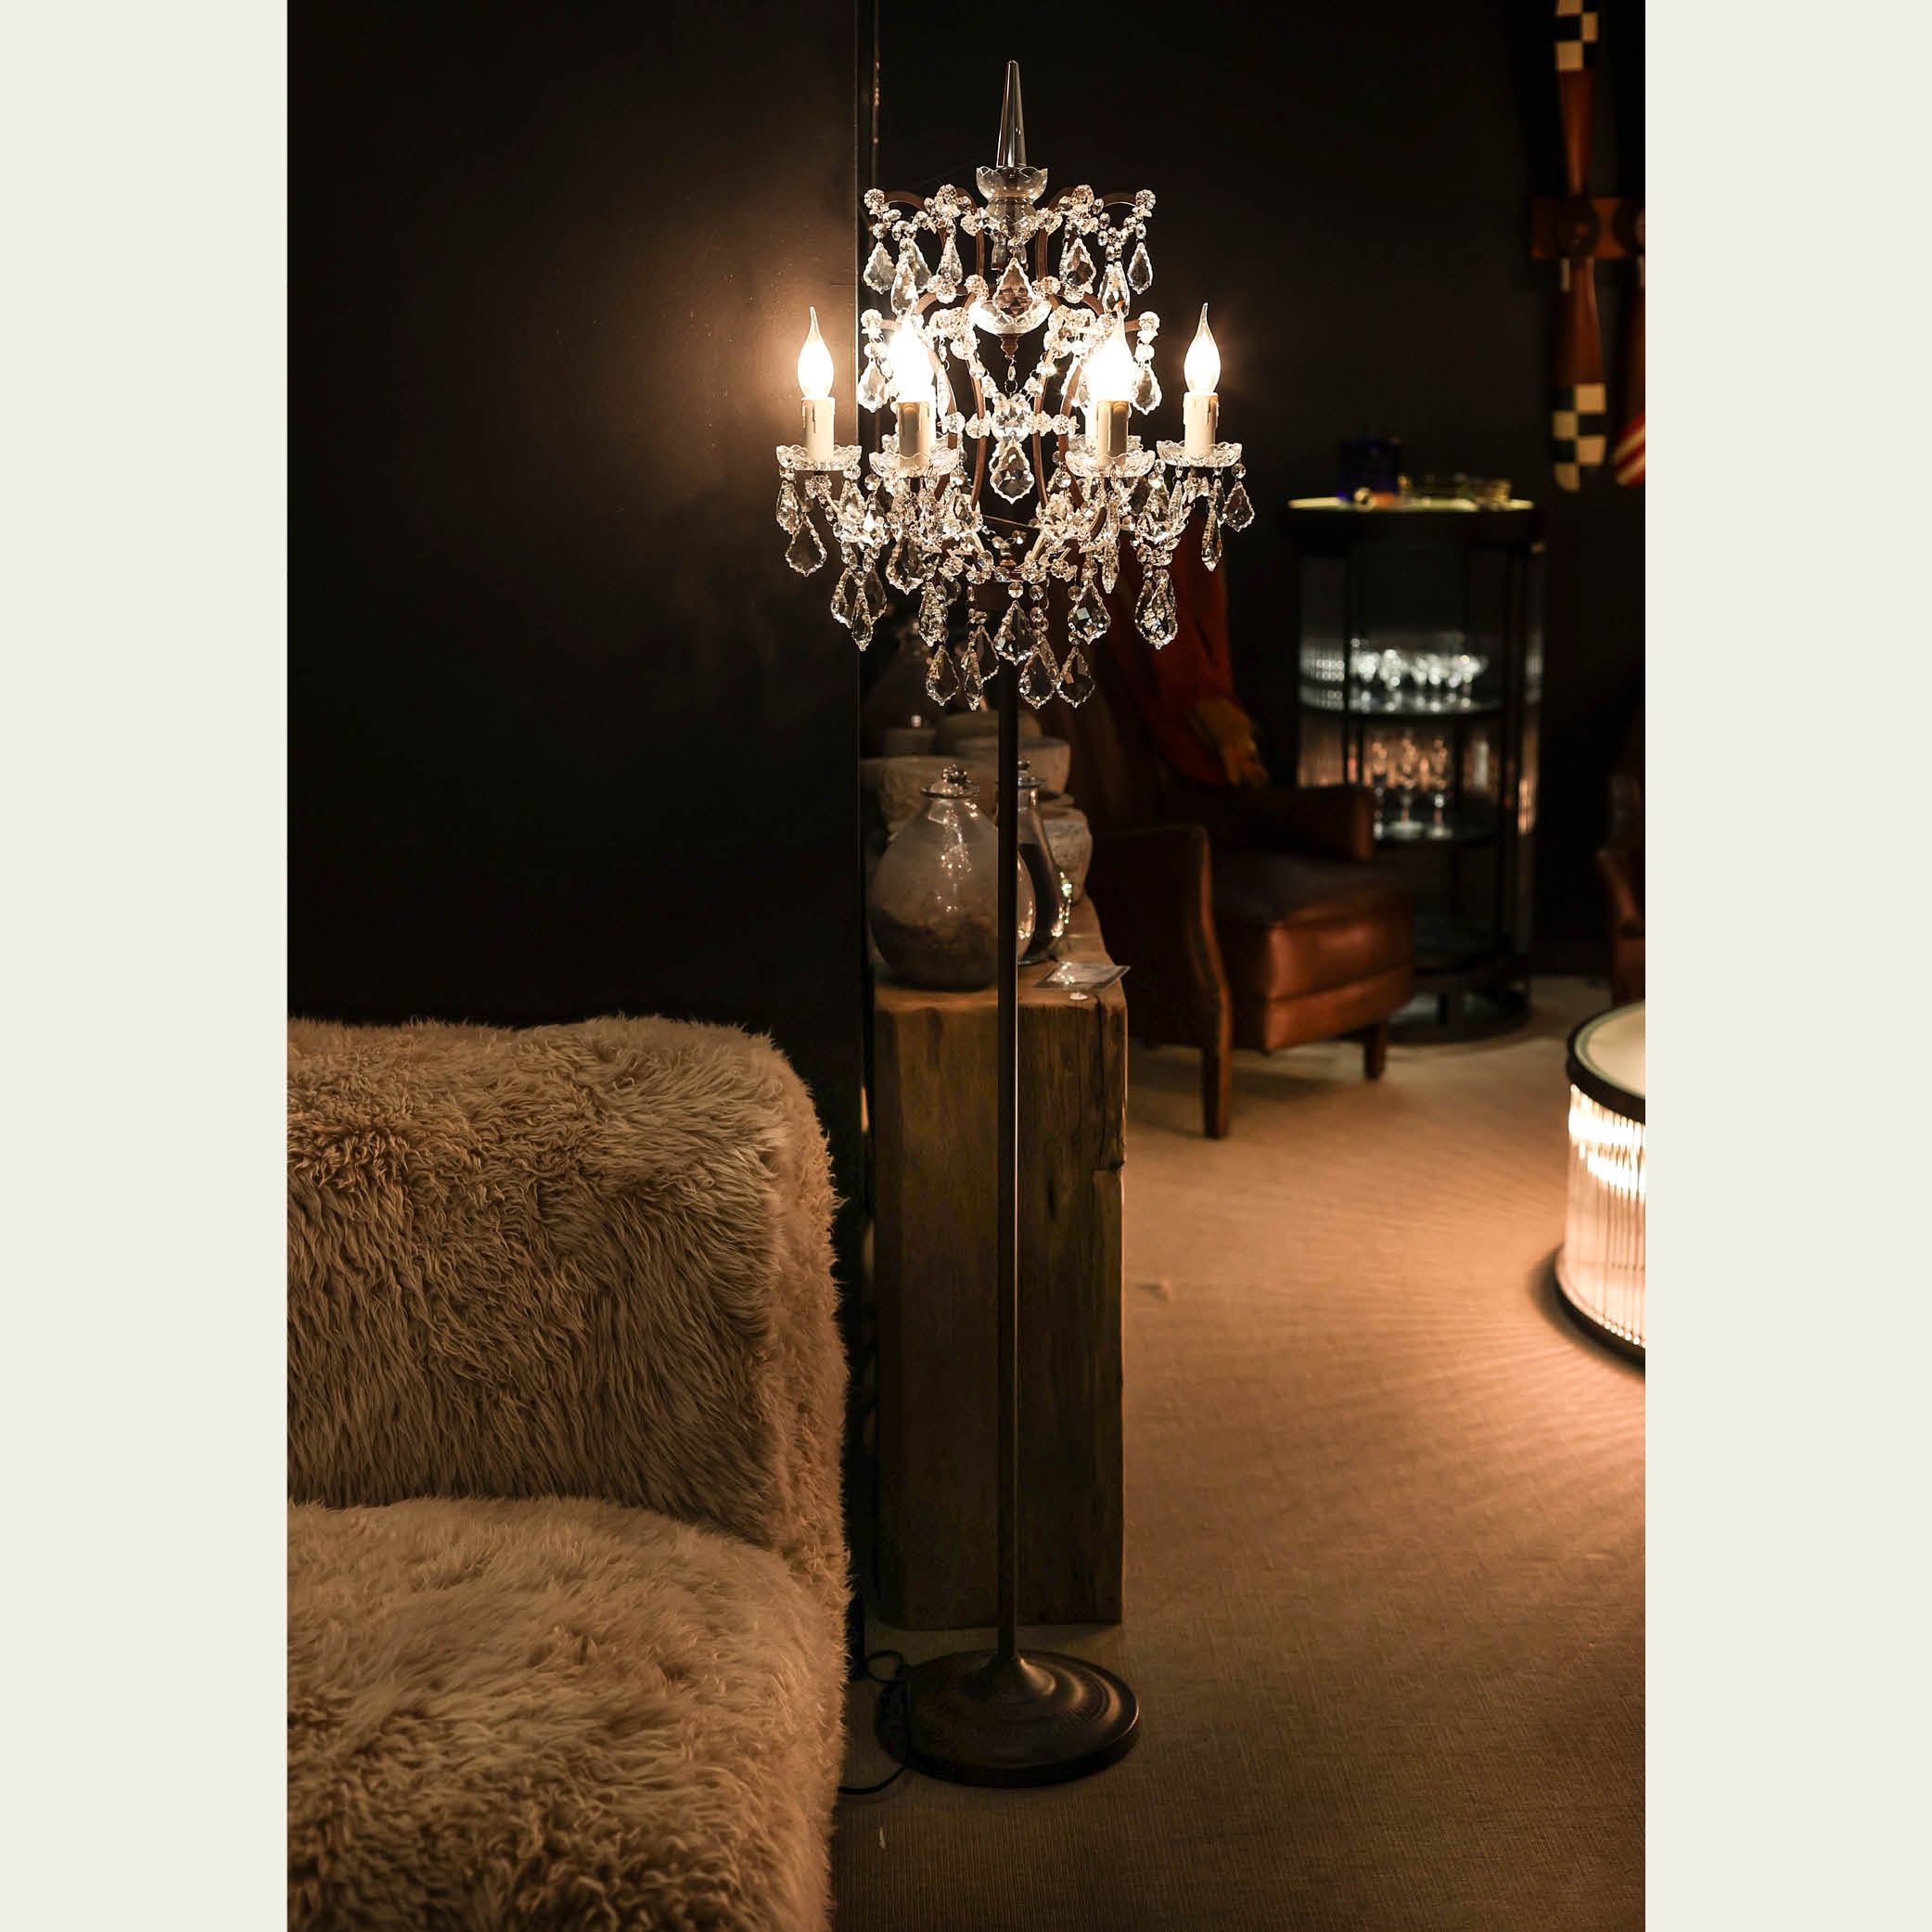 EXPO Timothy Oulton CRYSTAL Lampadaire